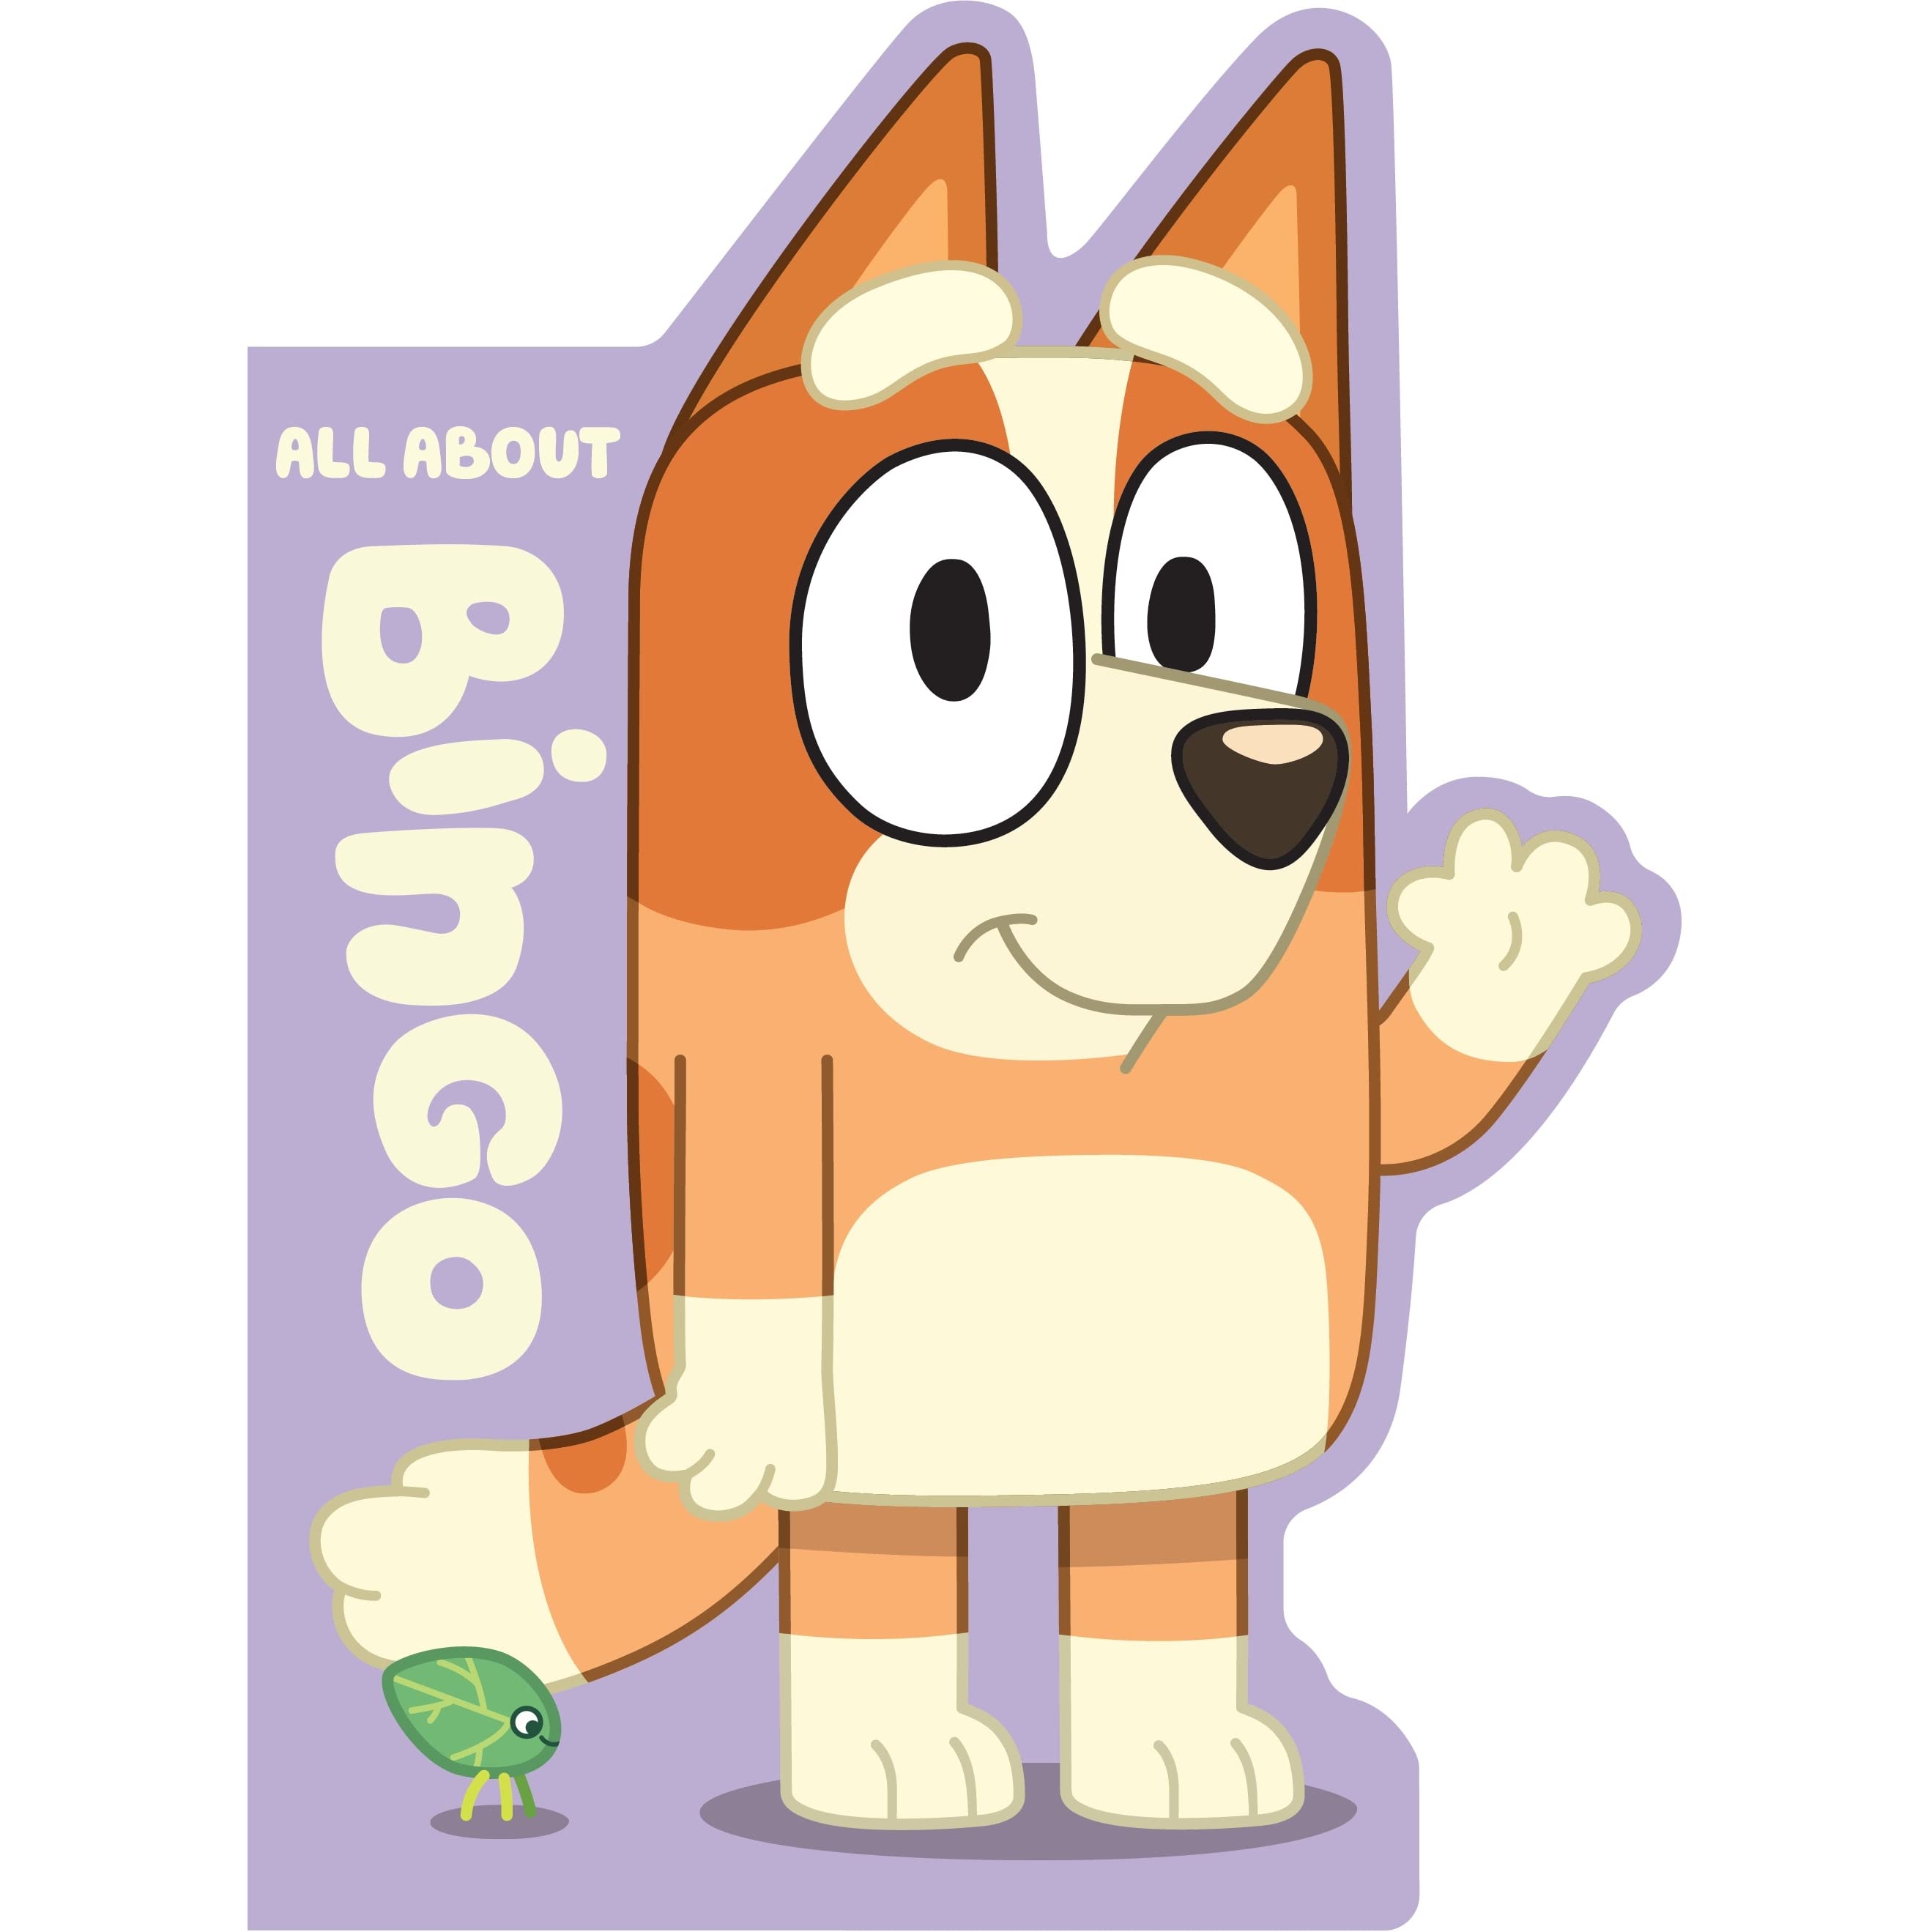 All About Bingo by Bluey.